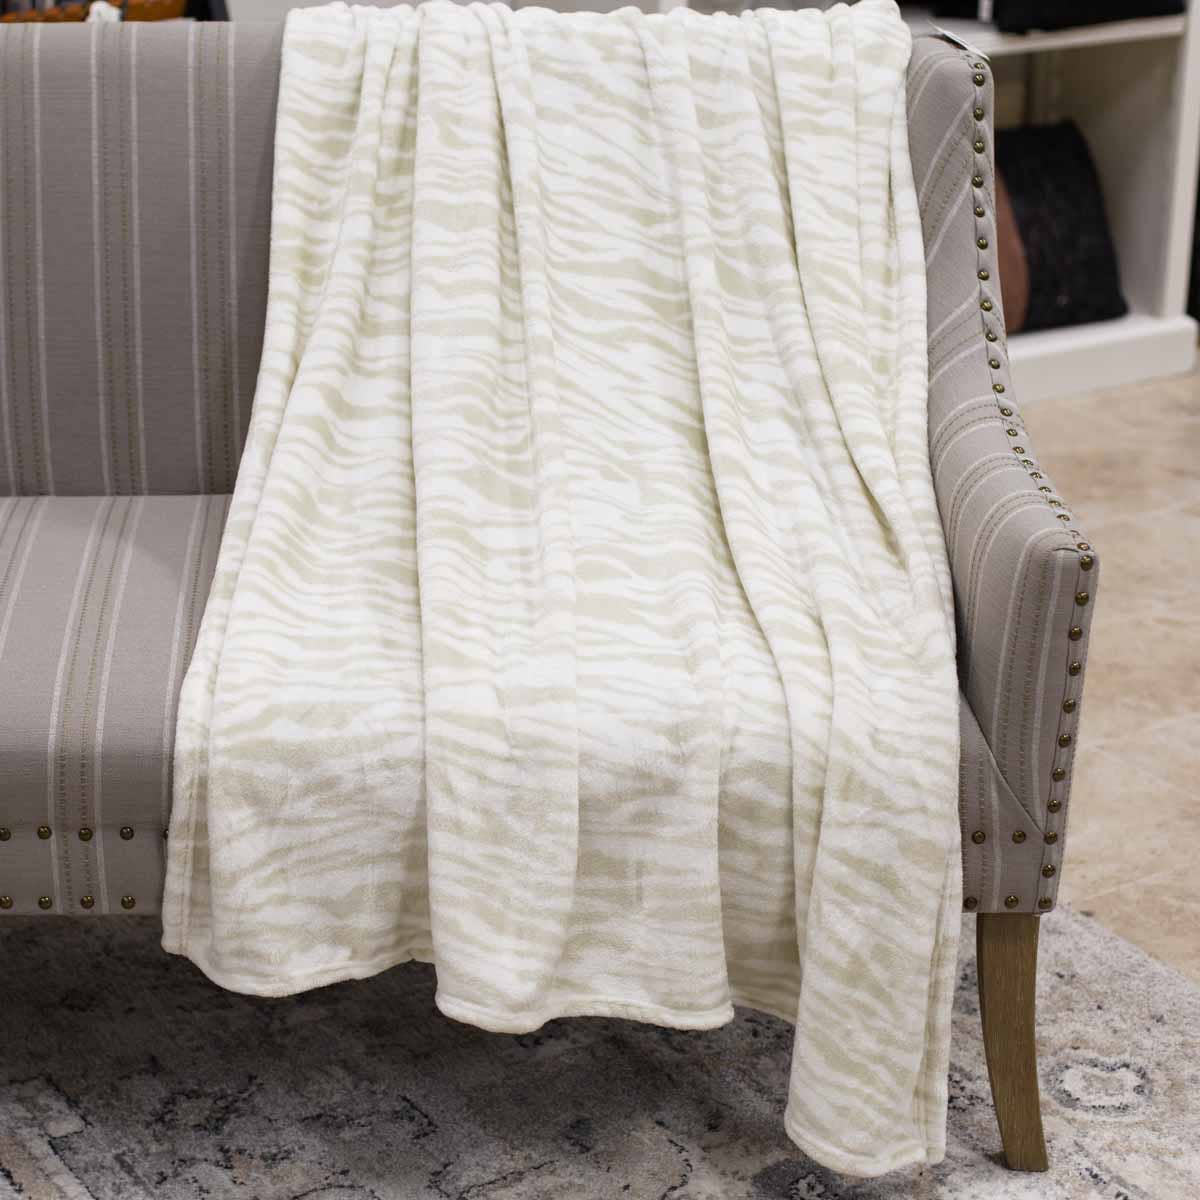 The Royal Standard Blanket Tiger Stripe Throw   Off White/Shell   50x60